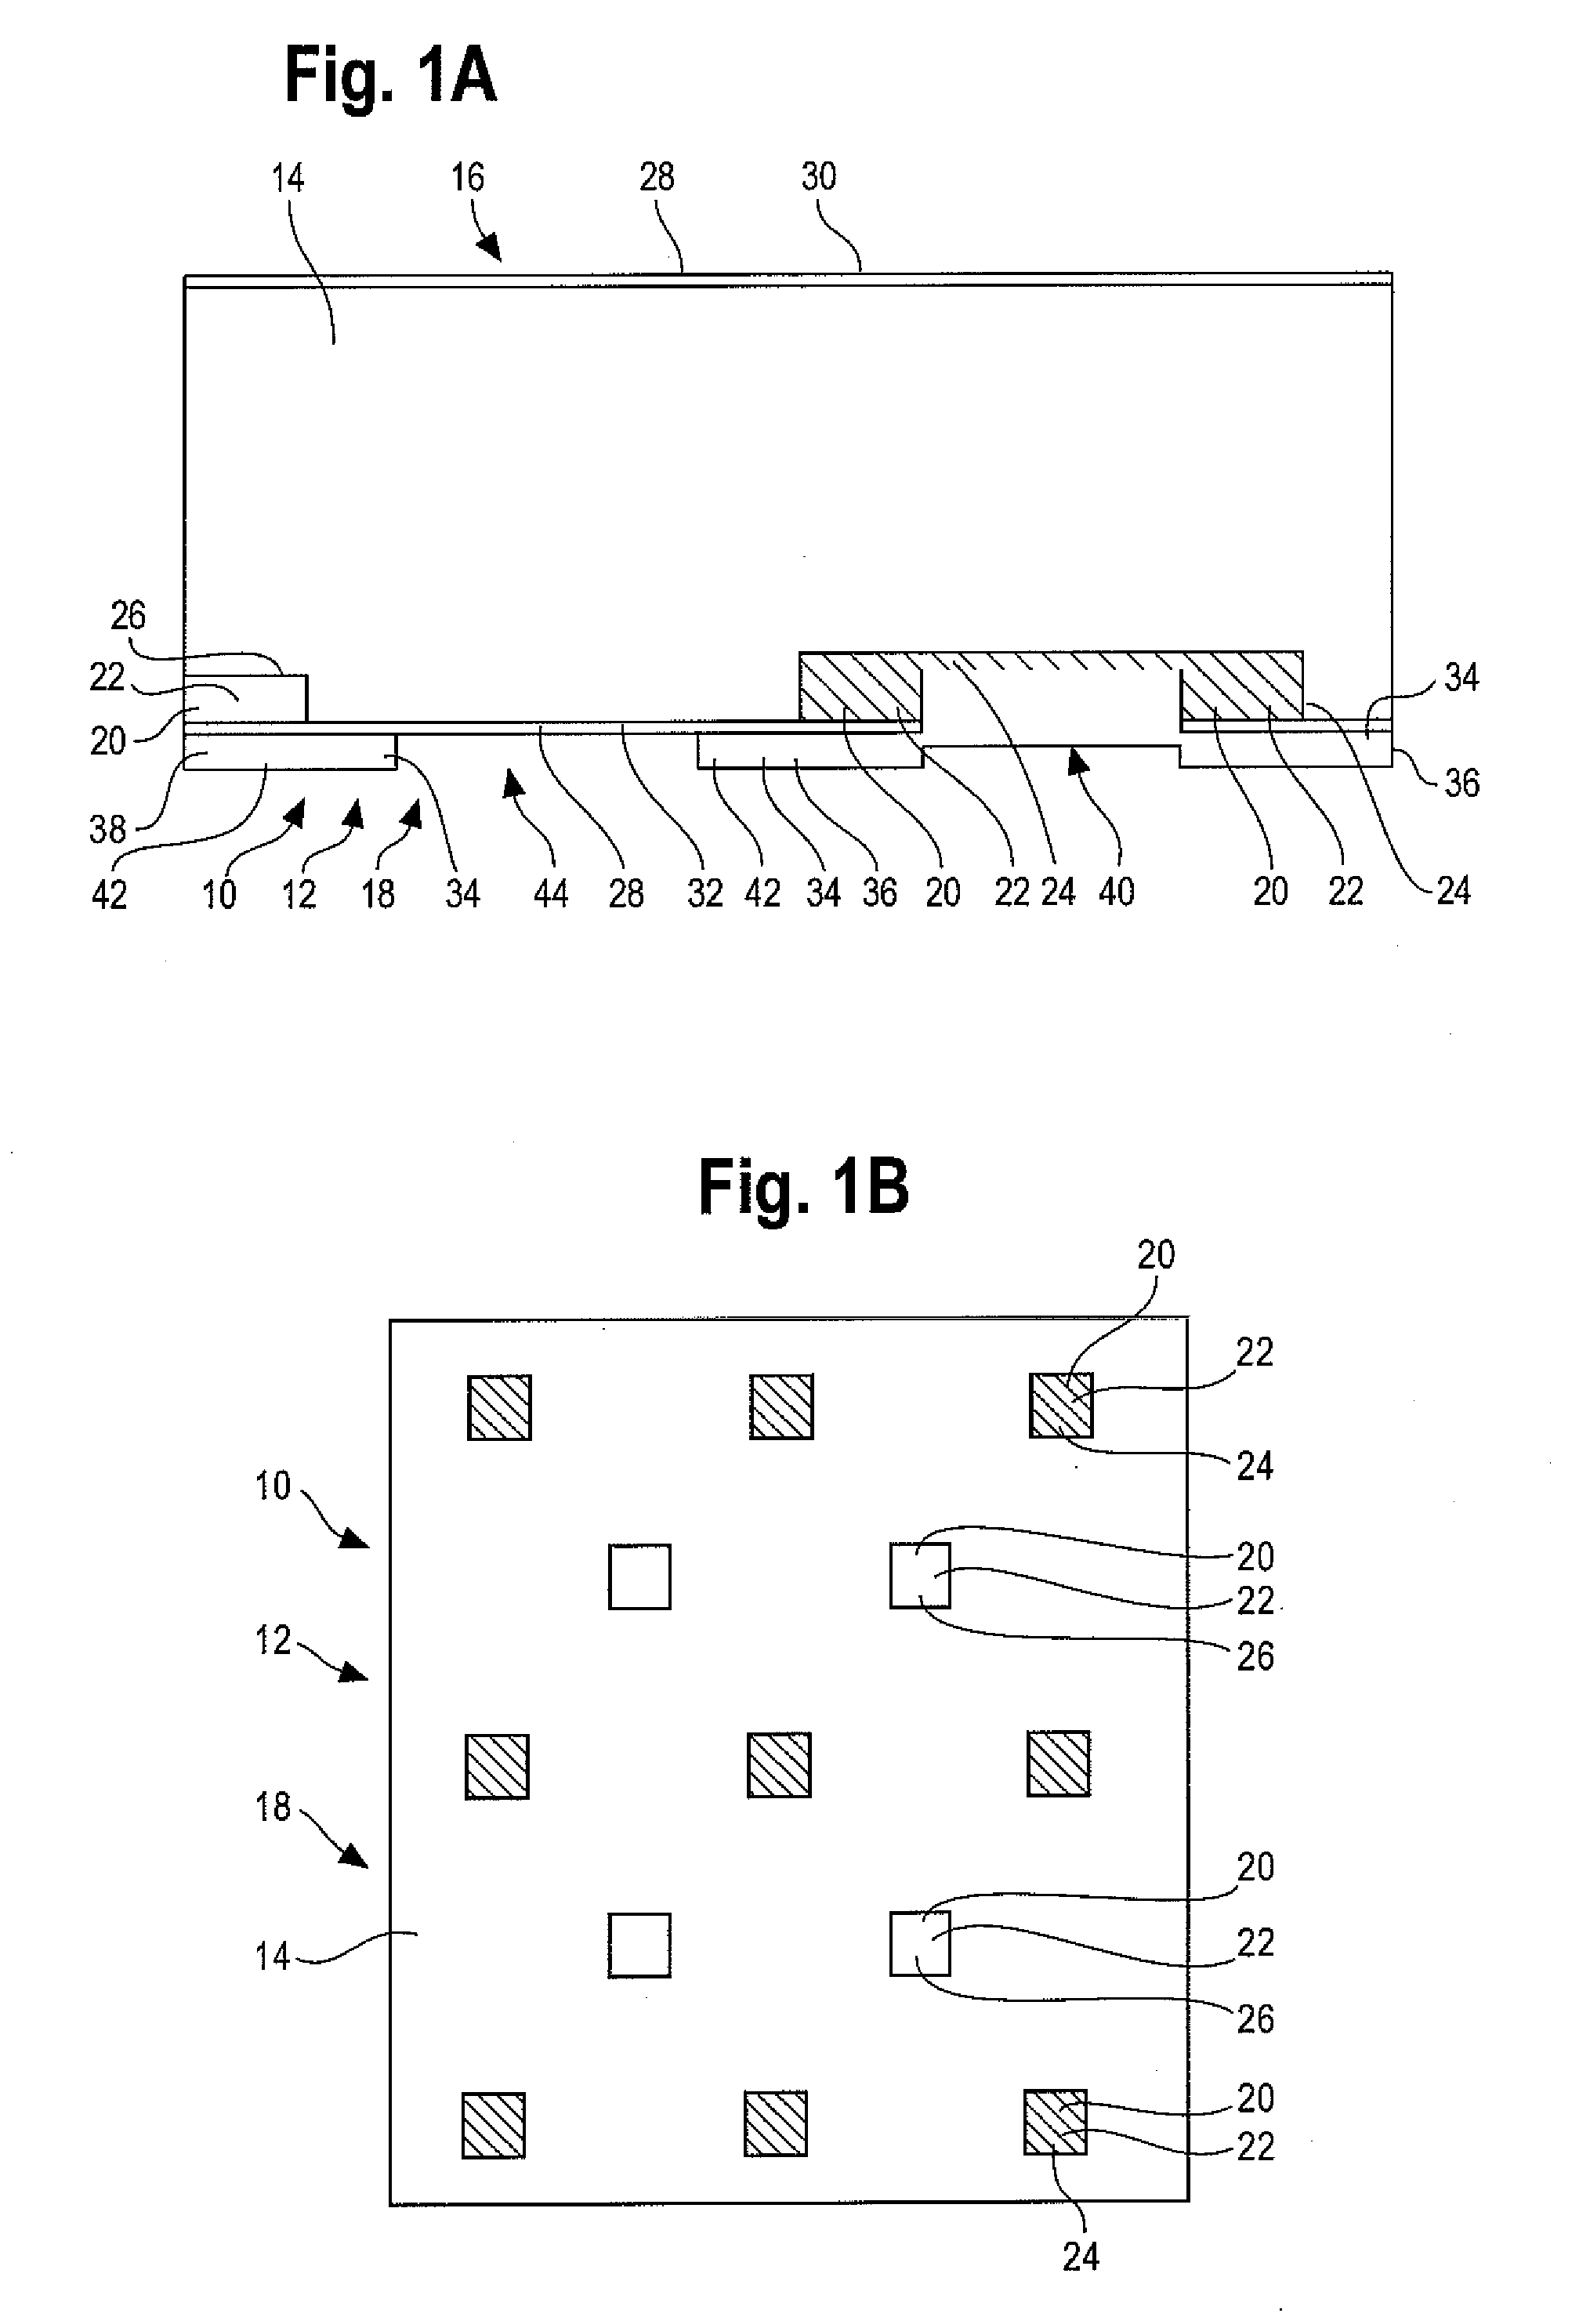 Apparatus and Method for Solar Cells with Laser Fired Contacts in Thermally Diffused Doped Regions